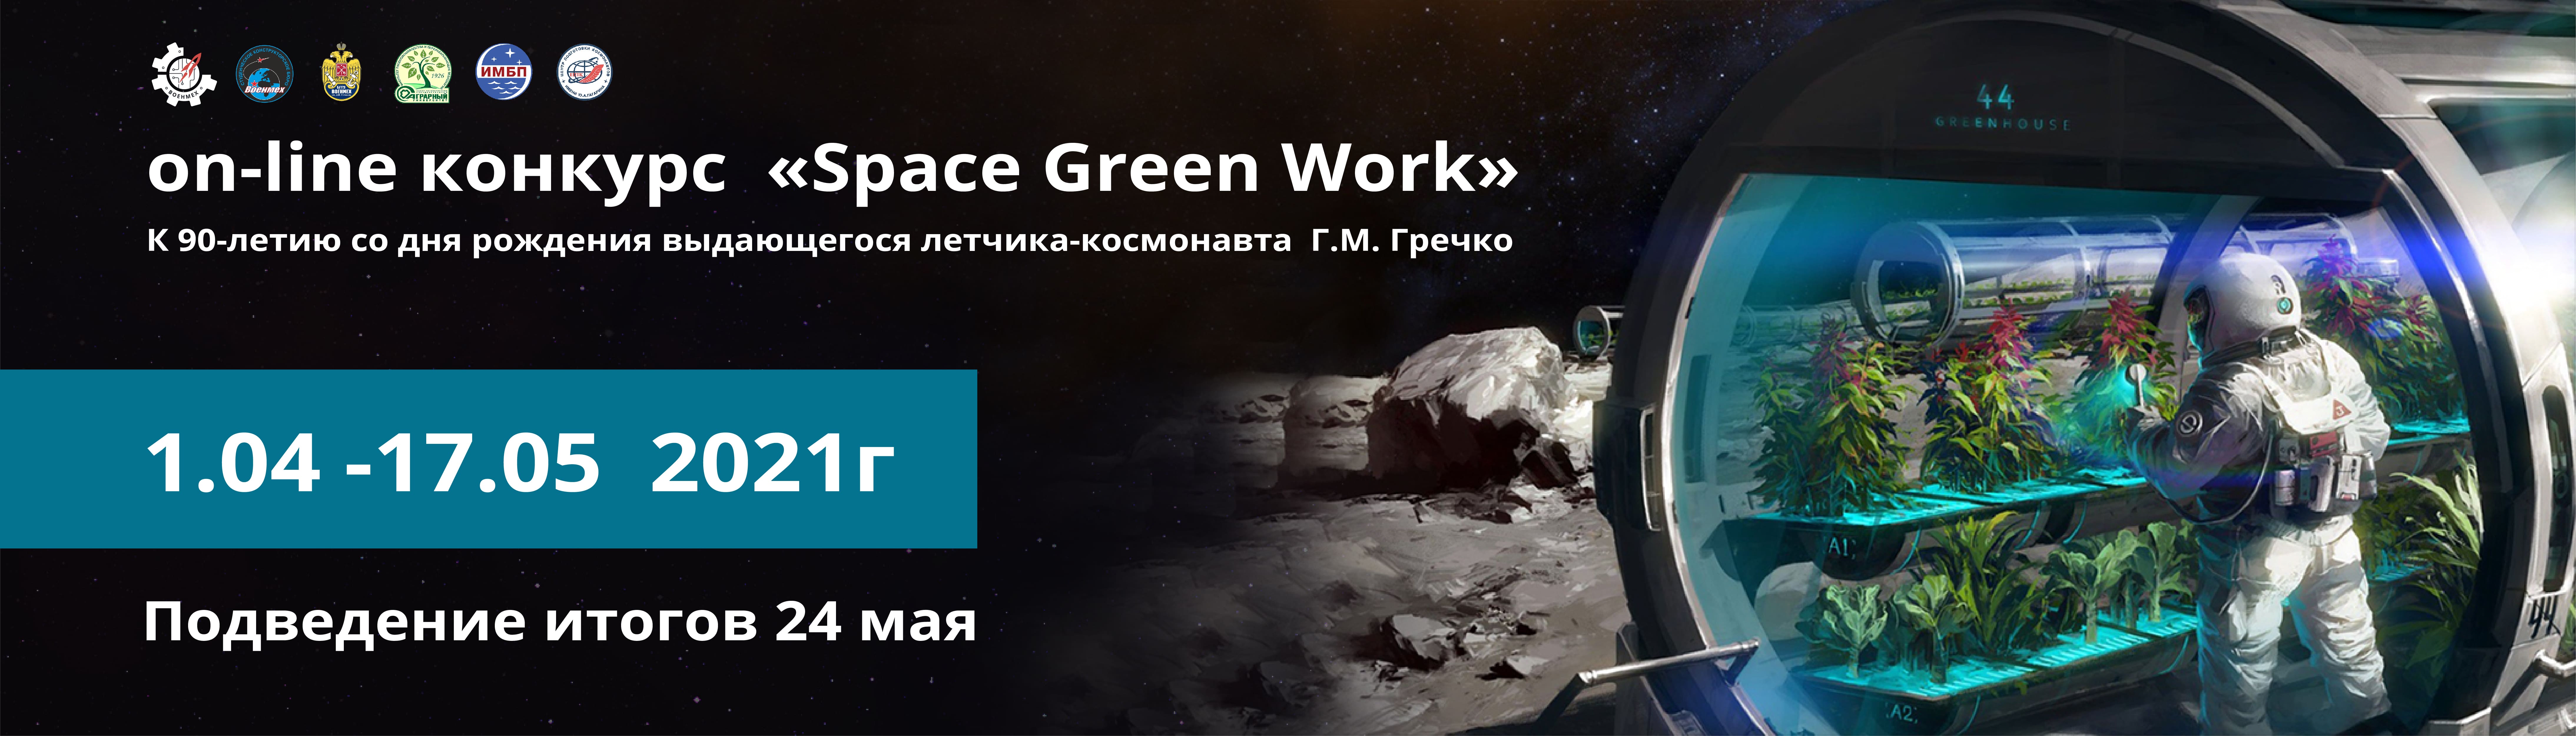 space green work 2021